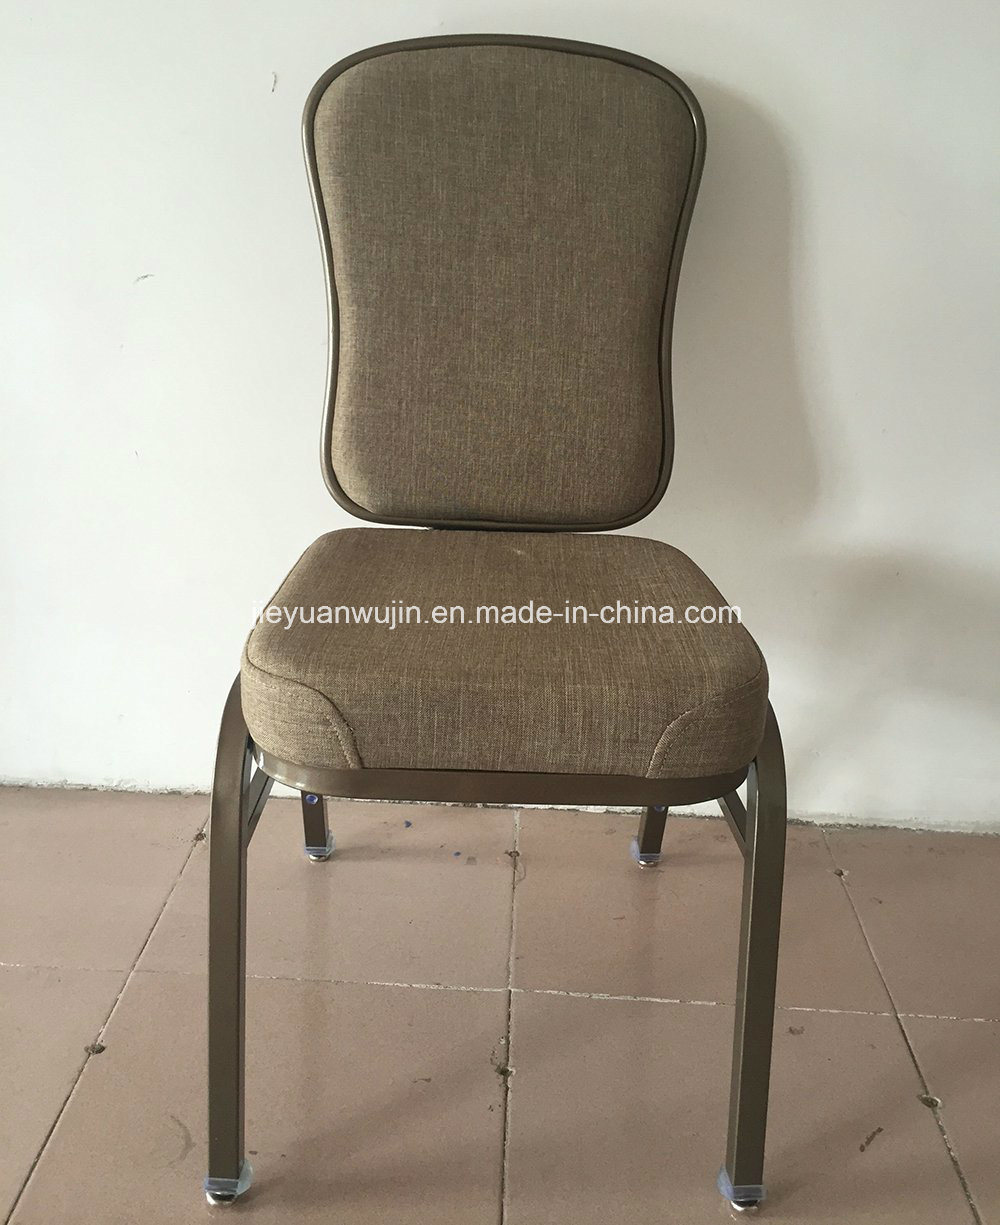 Aluminum Hotel Banquet Flex Back Conference Chairs Stackable (JY-Y01)